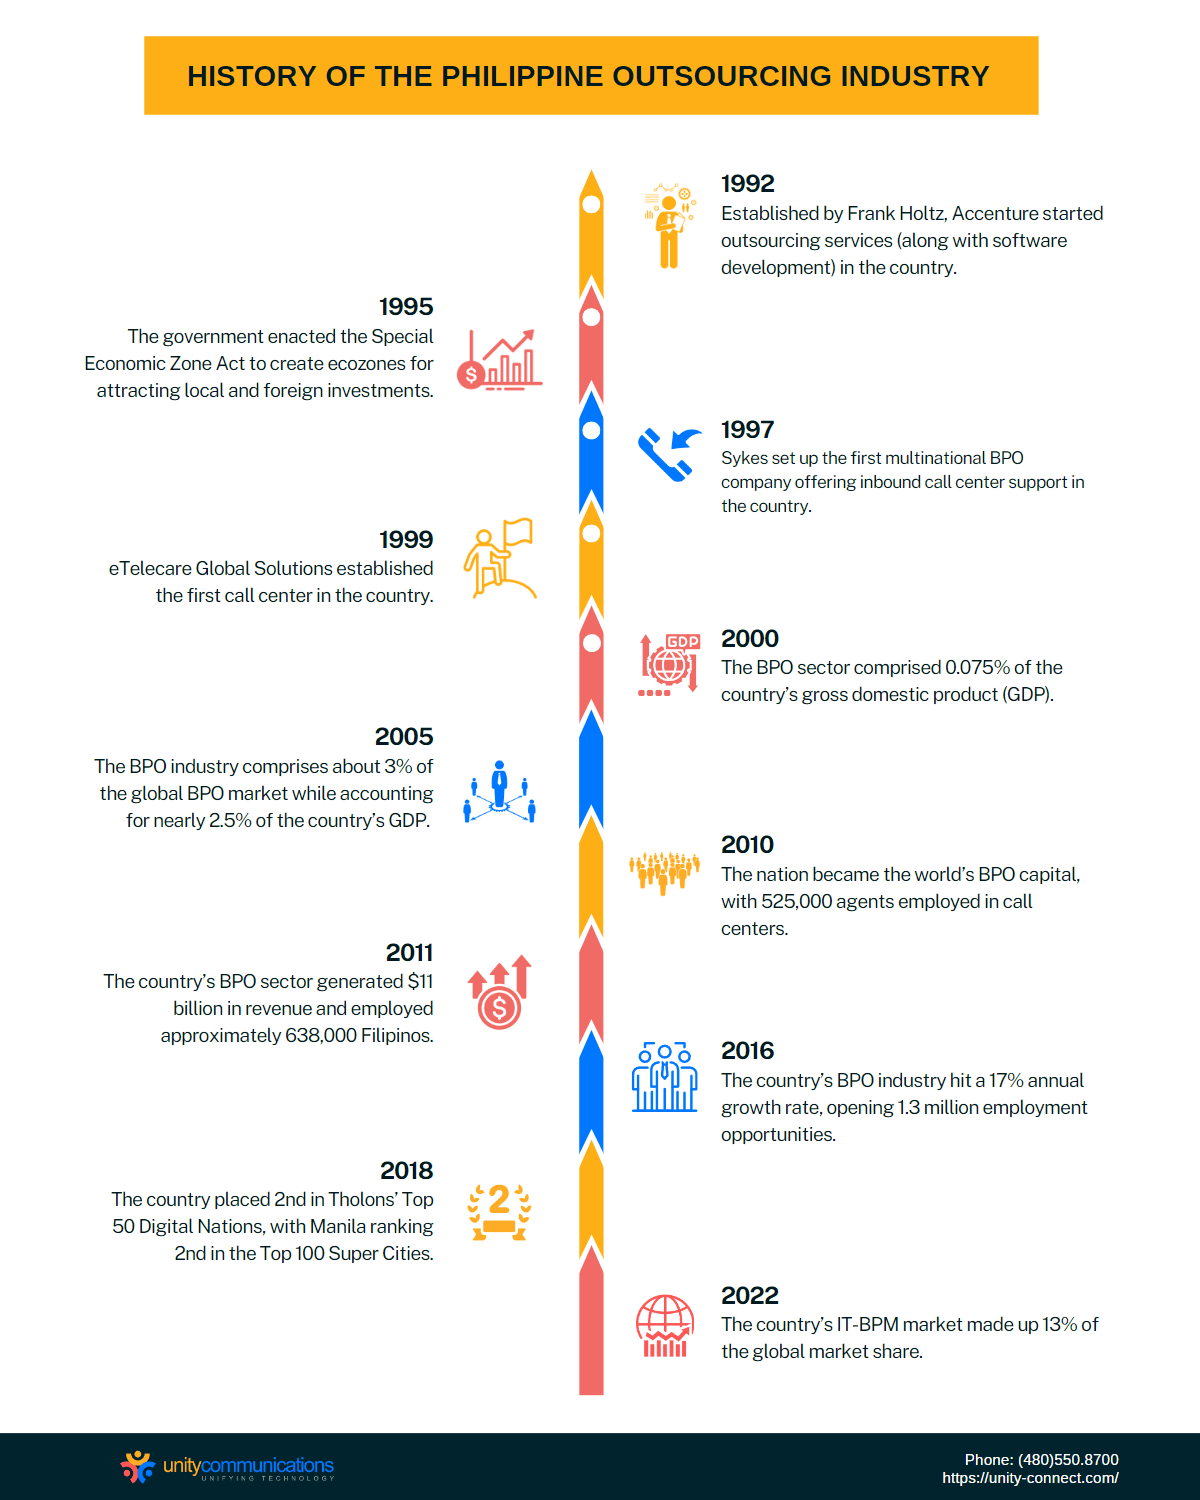 TimeLine Infographic - History of the Philippine Outsourcing Industry